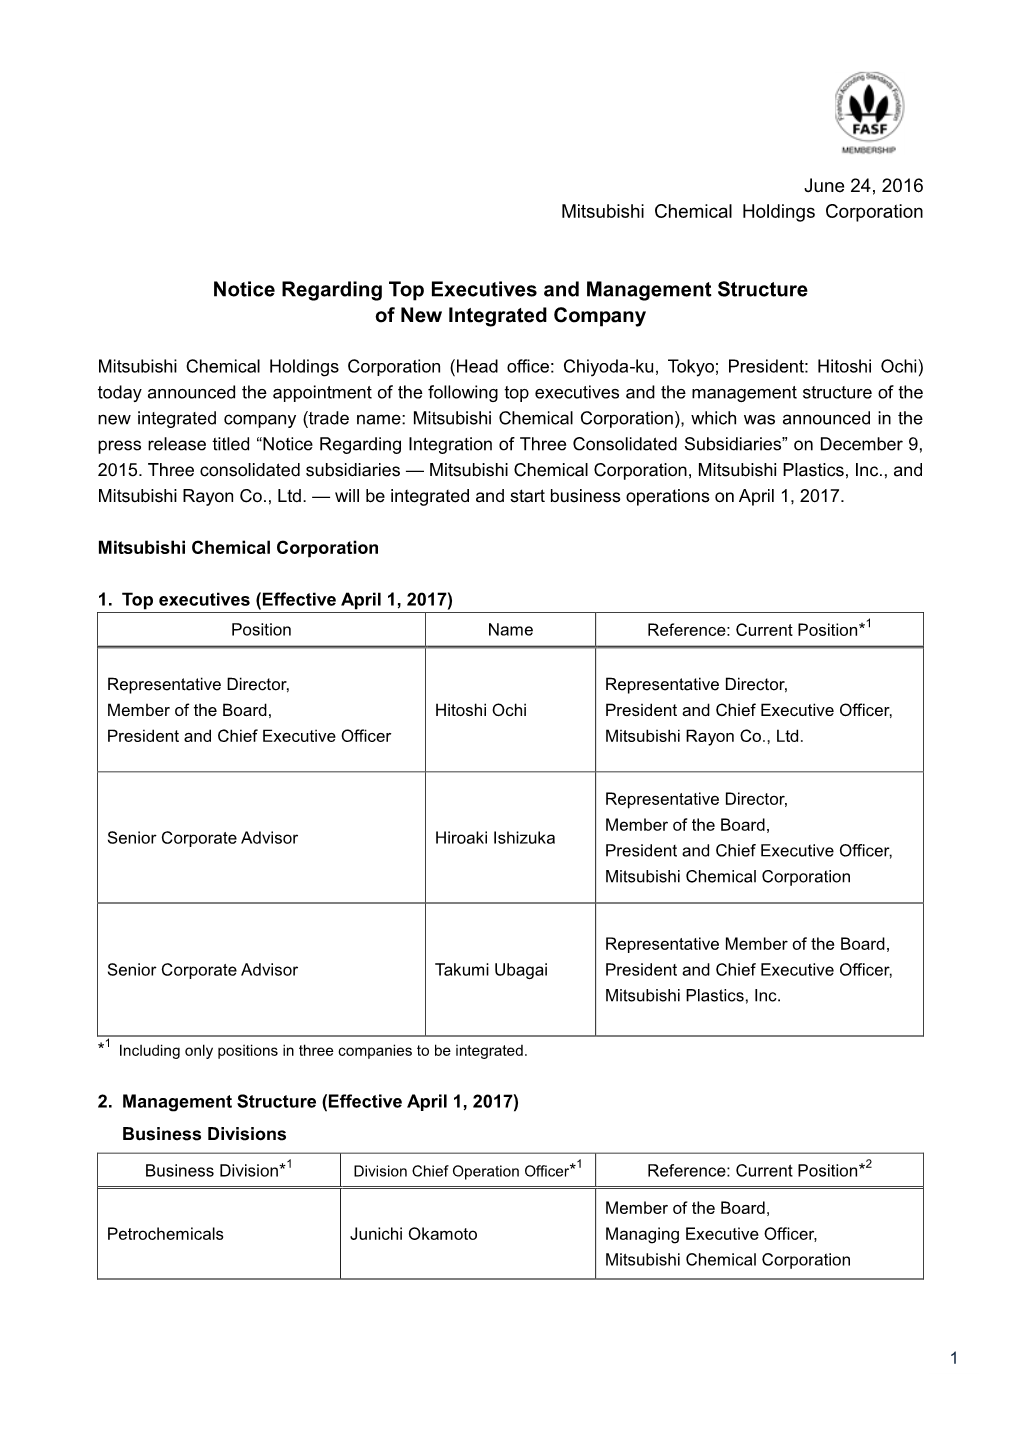 Notice Regarding Top Executives and Management Structure of New Integrated Company